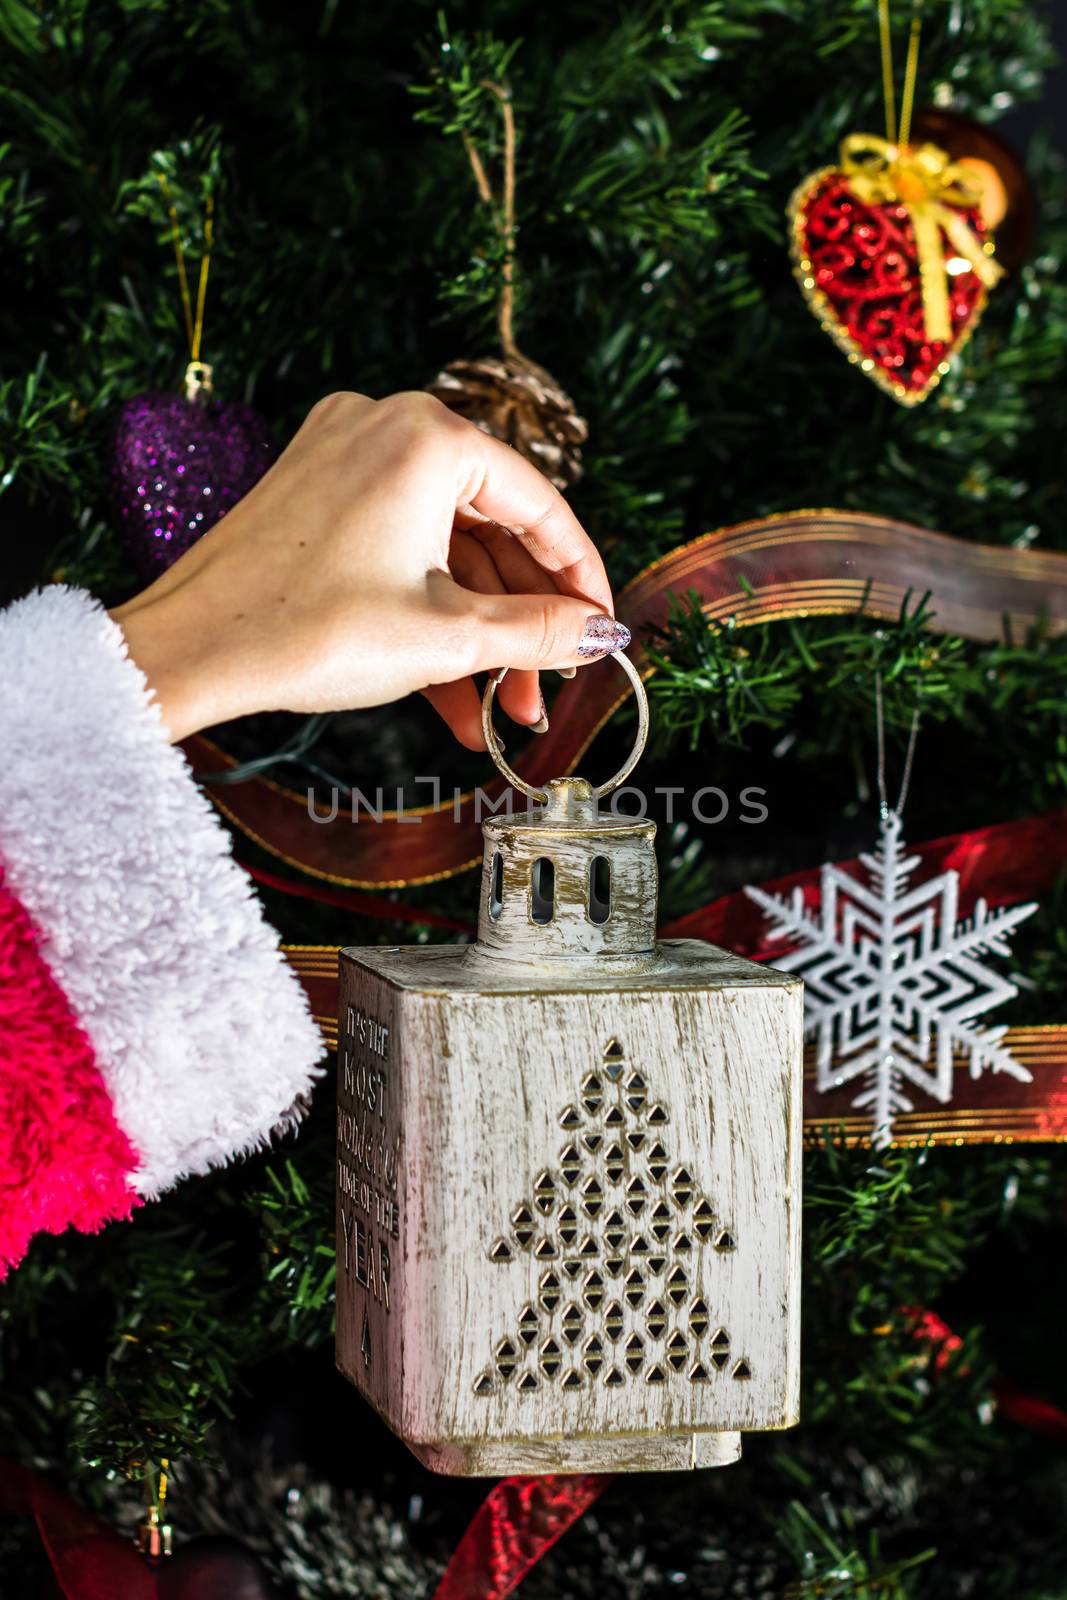 Hands holding Christmas ornament in front of Christmas tree. Decorating fir branches with Christmas decorations.